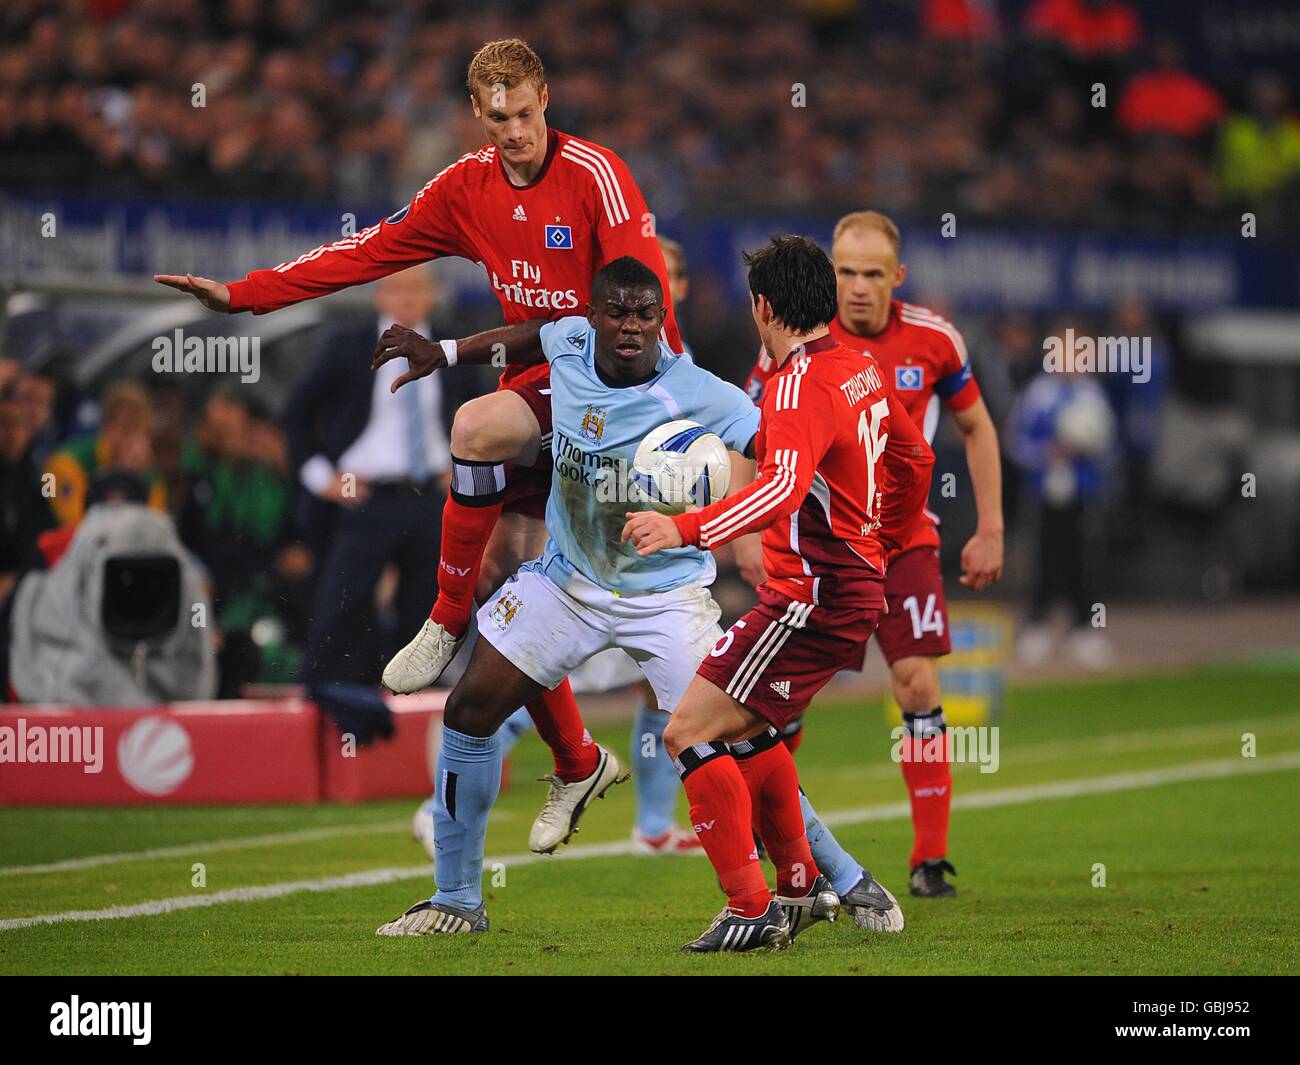 Manchester City's Micah Richards (centre) battles for the ball with Hamburg's Marcell Jansen (behind) and Piotr Trochowski(front right) Stock Photo